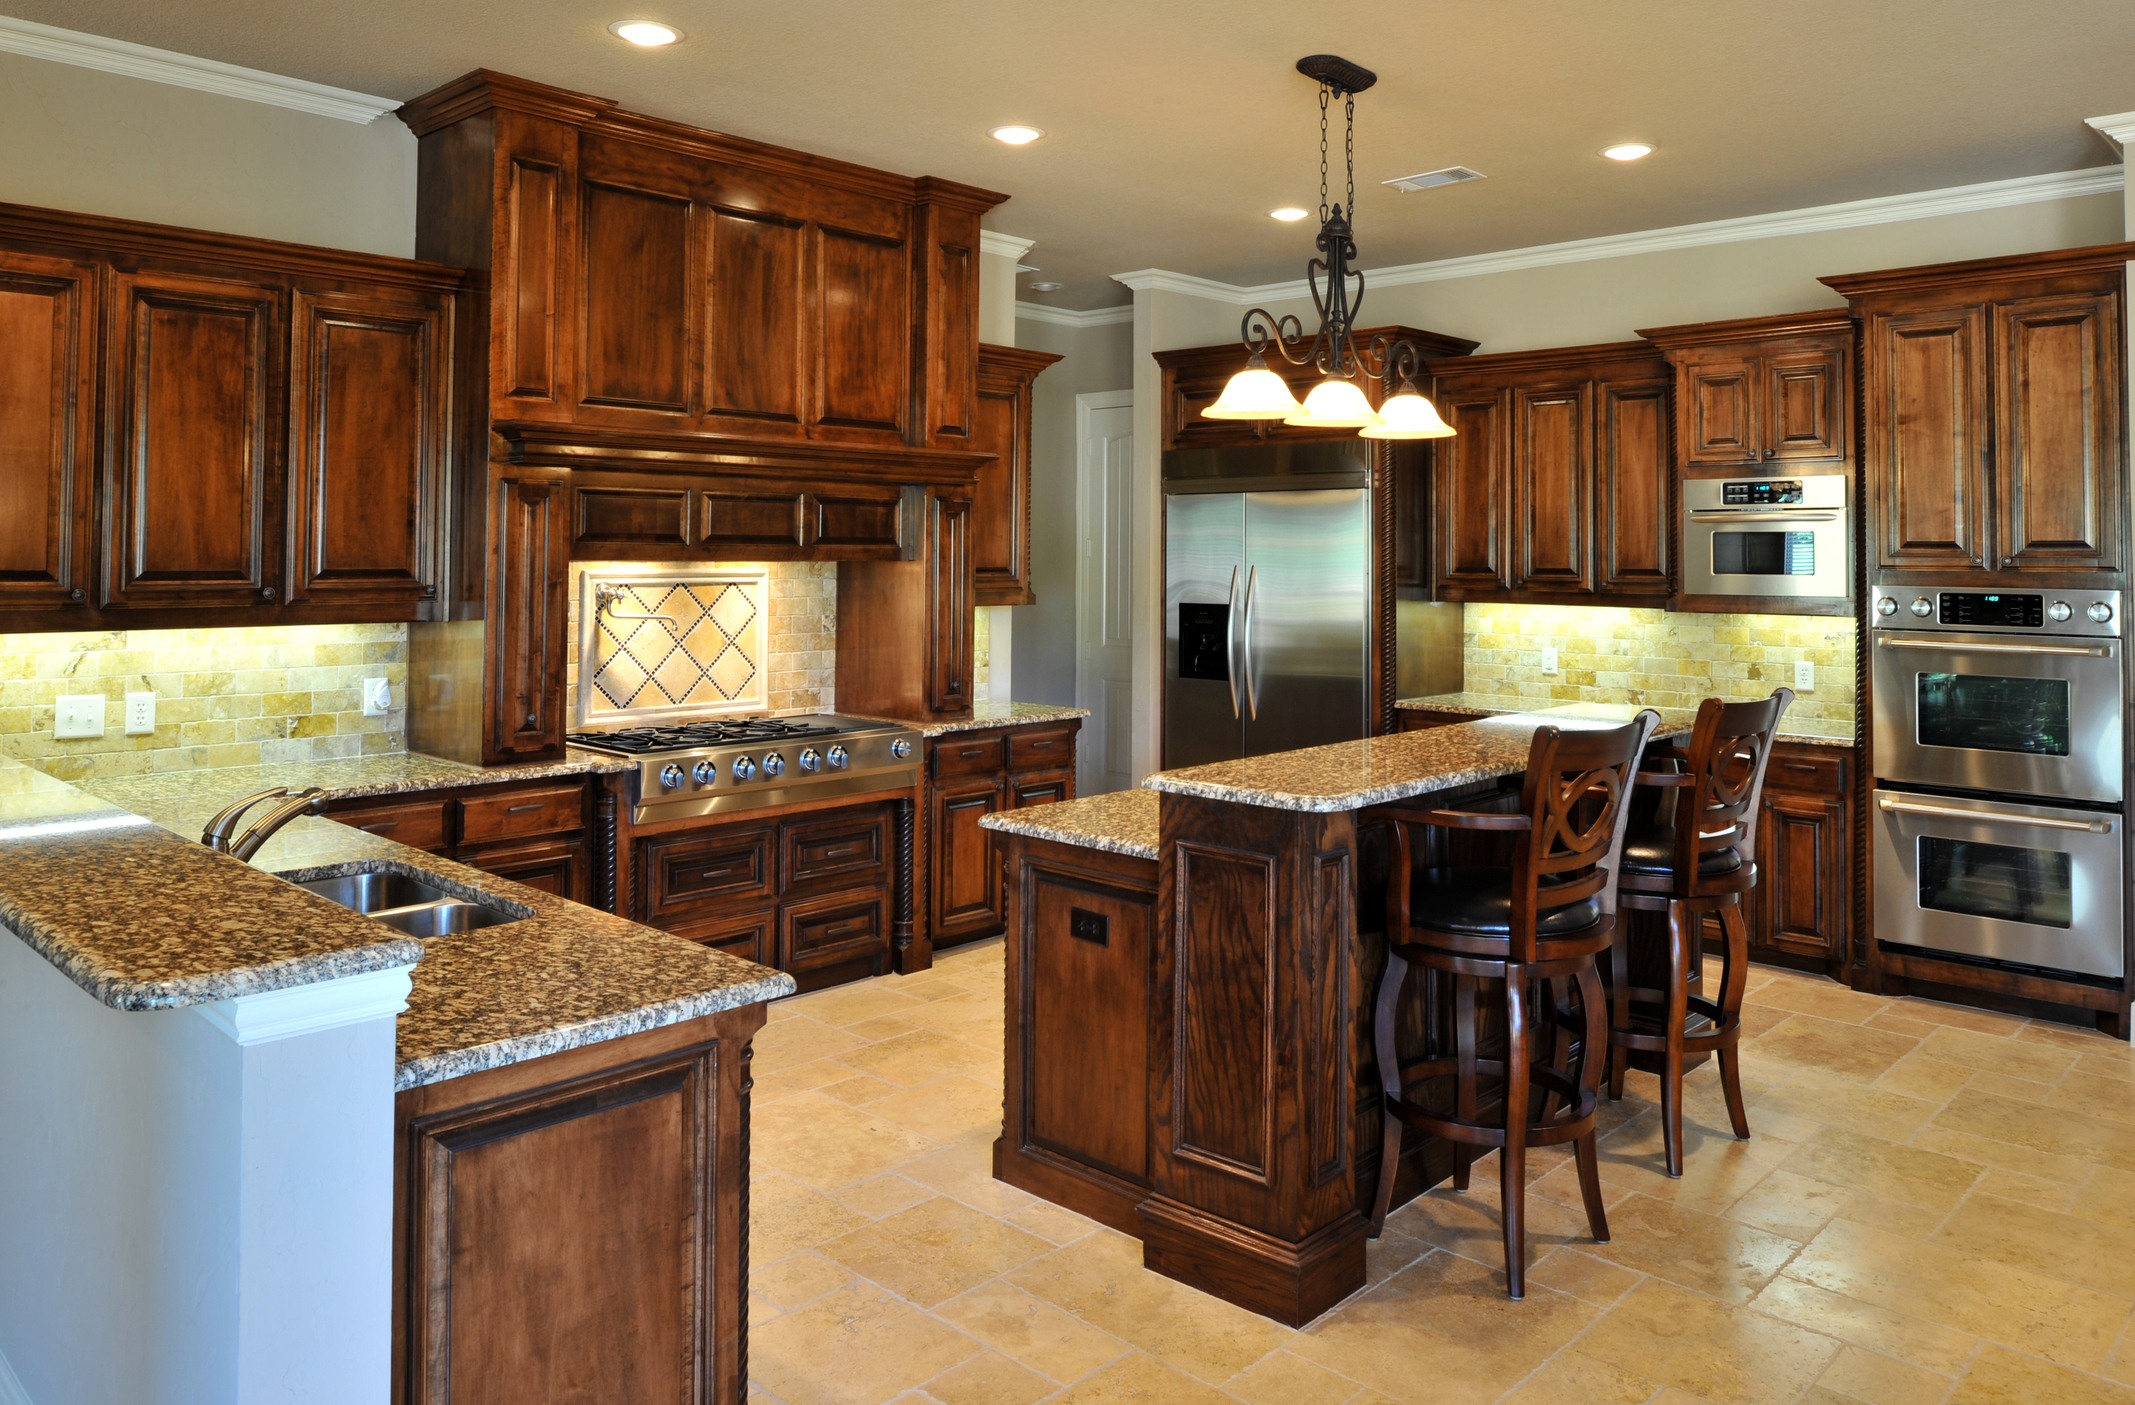 Spacious kitchen with wooden cabinets, granite countertops, stainless steel appliances, and an island with bar stools. Chandeliers hang from the ceiling